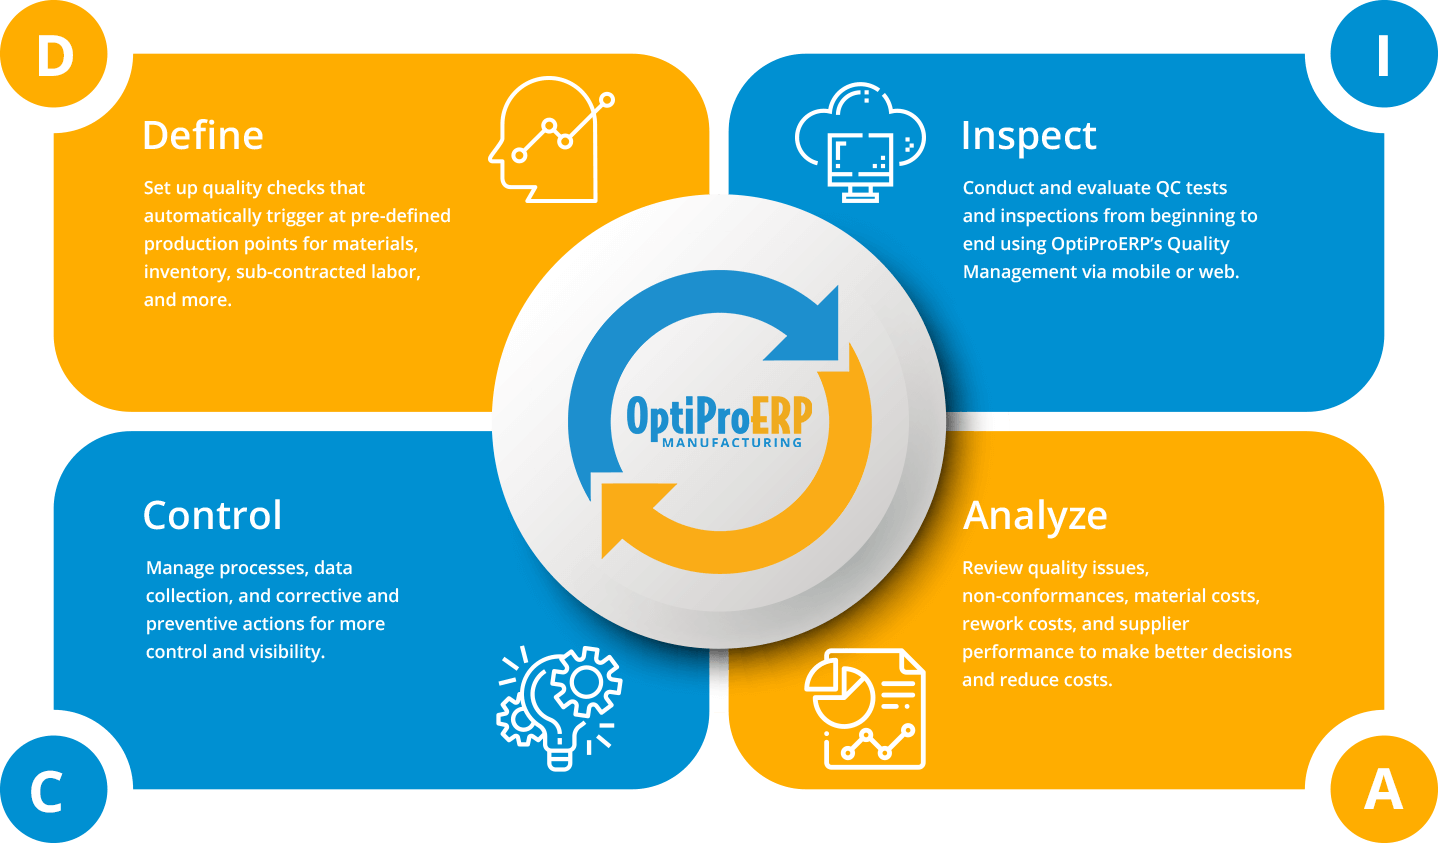 How OptiProERP’s Quality Management Software Can Work for You